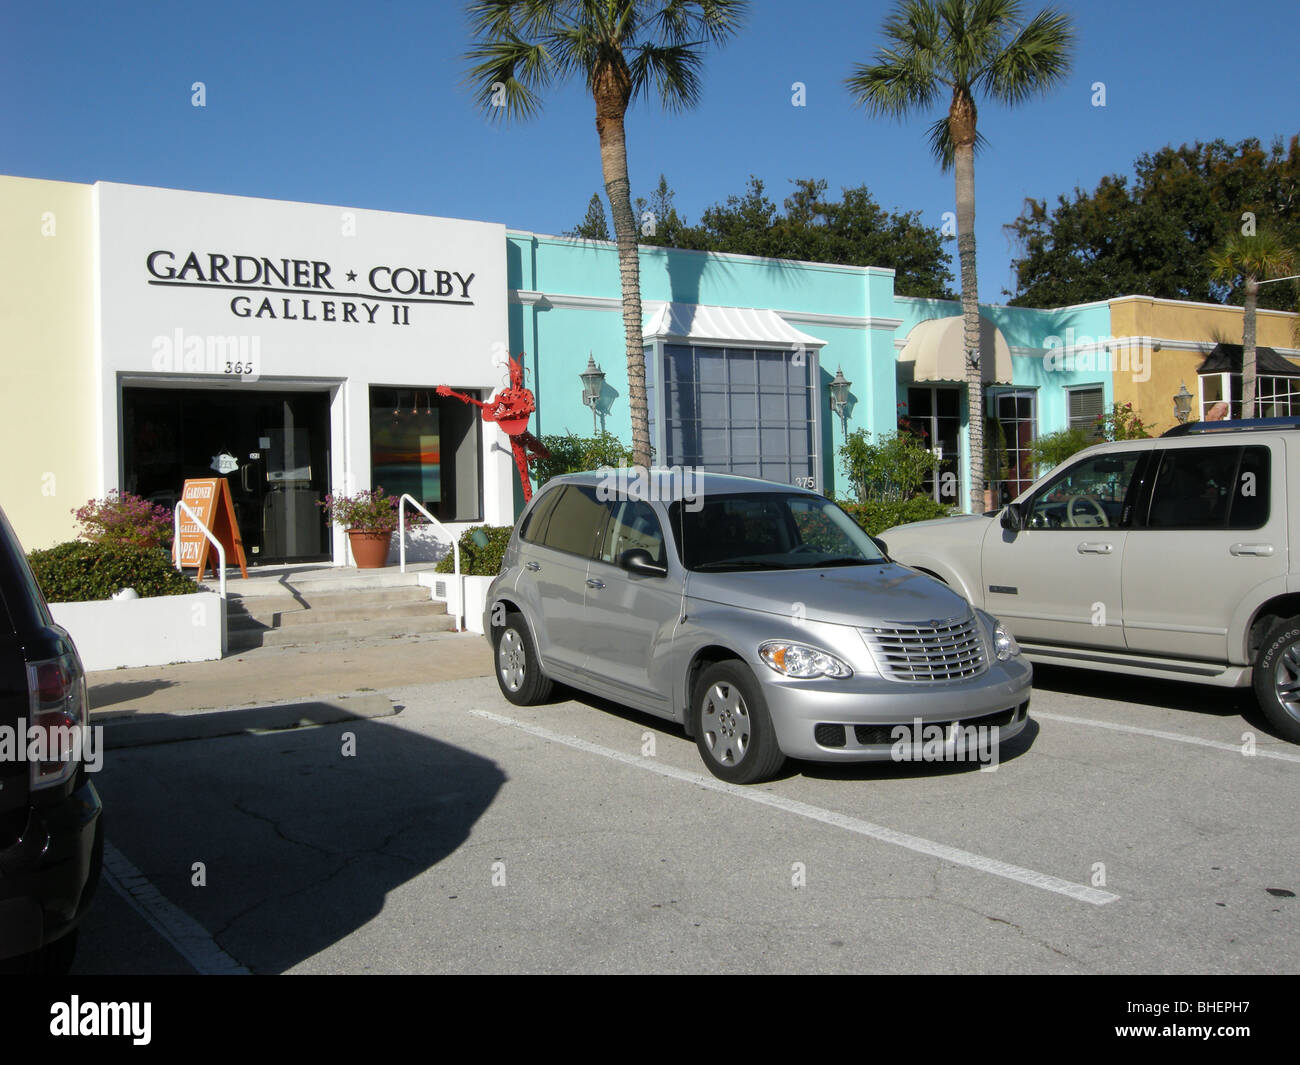 2009  Chrysler Cruiser in front of the Gardner Colby Gallery in the historic district of Naples Florida USA Stock Photo